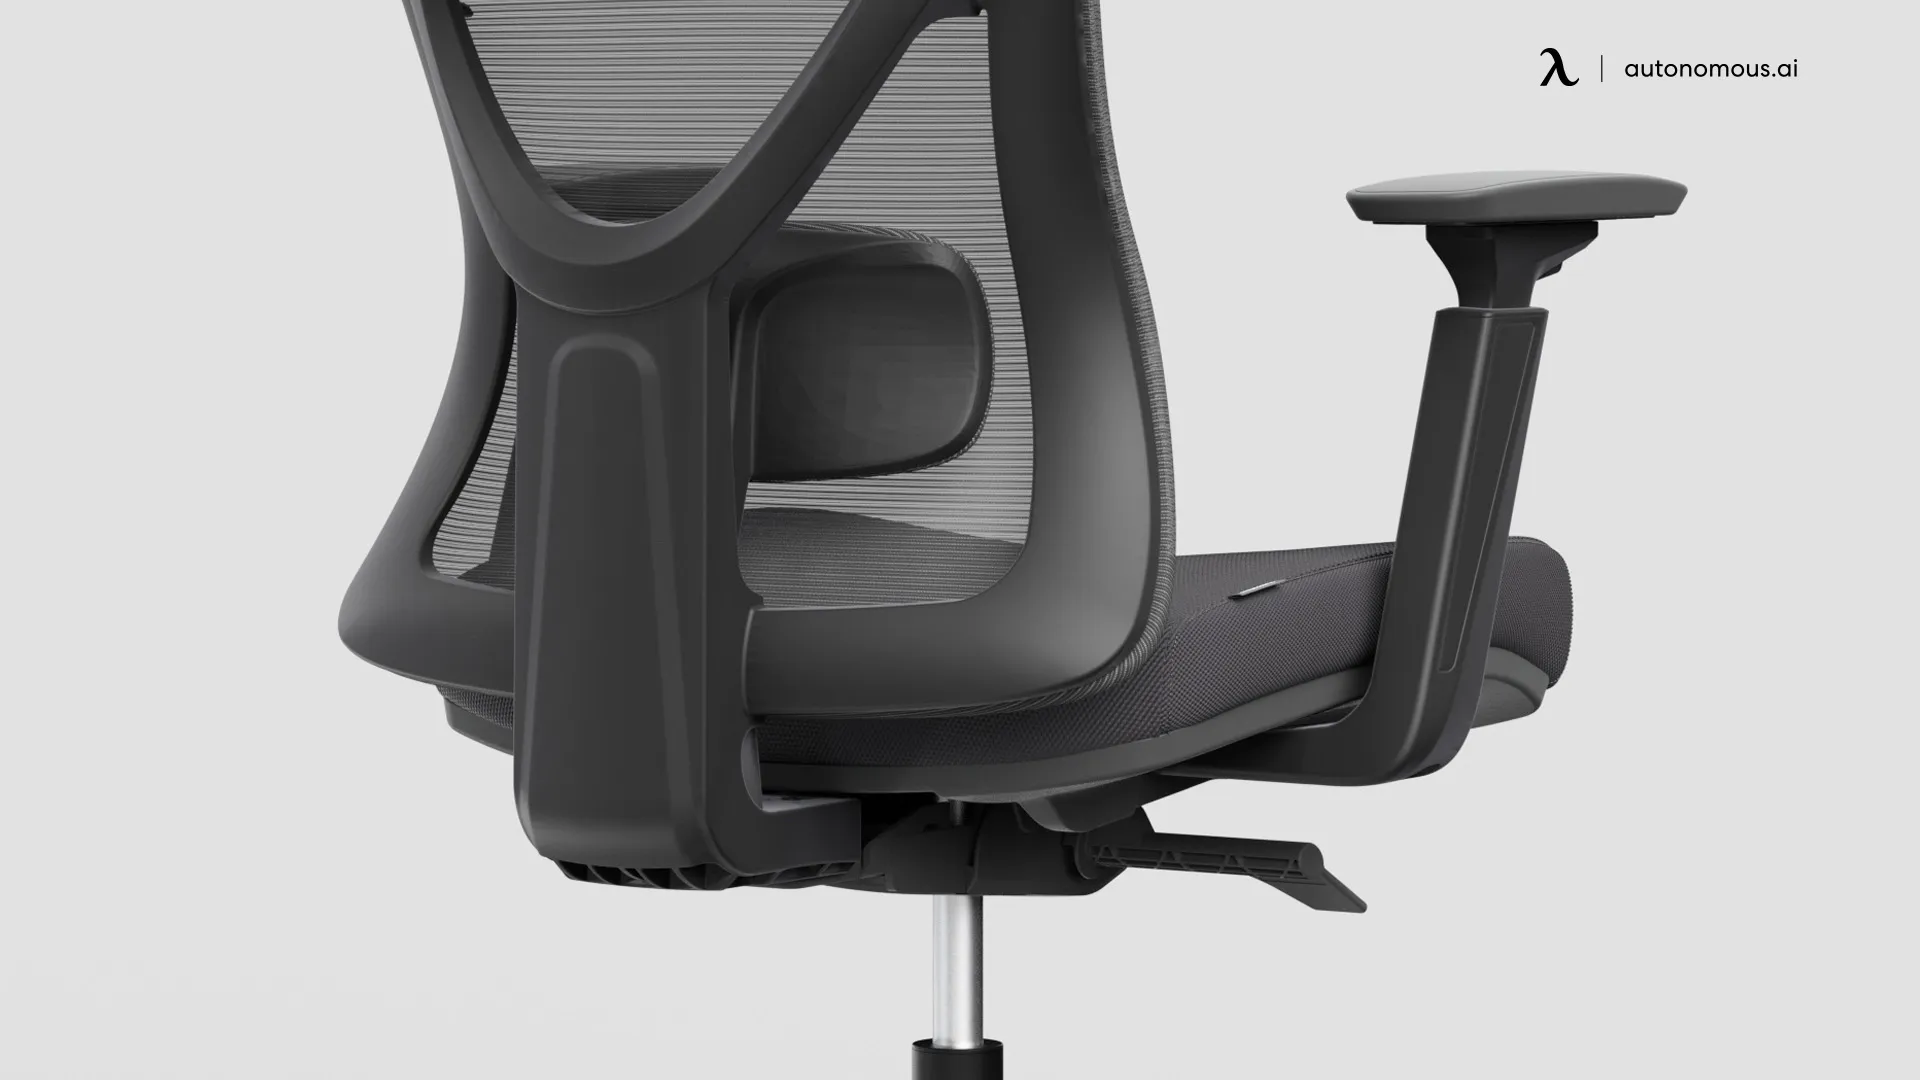 Factors to Consider When Choosing a Store for Ergonomic Chairs in Dubai